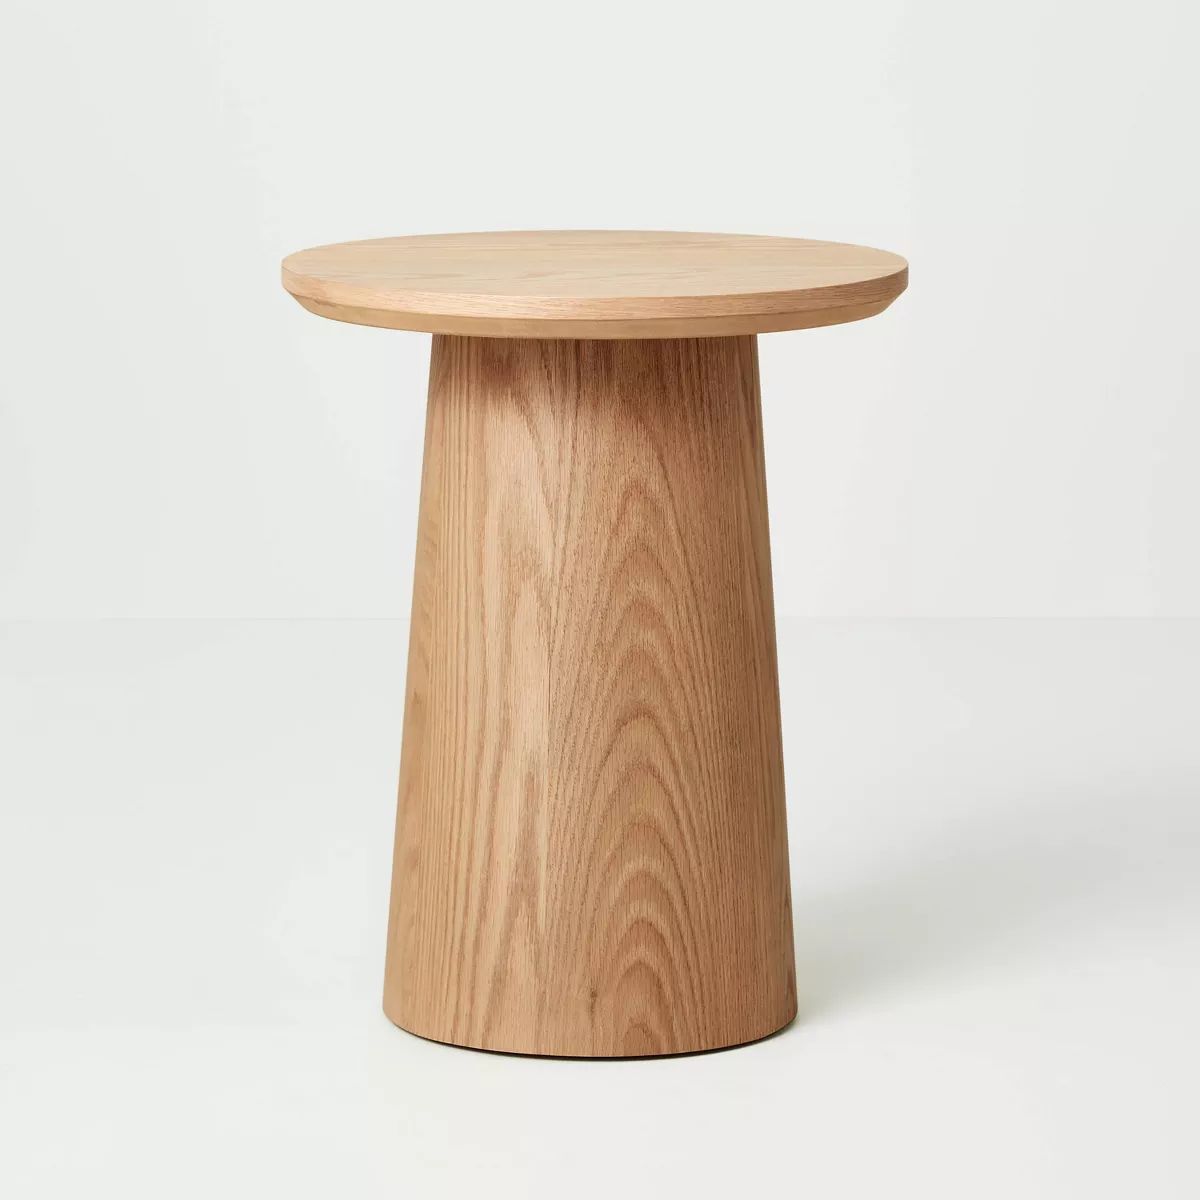 Round Wood Pedestal Accent Side Table - Natural - Hearth & Hand™ with Magnolia | Target